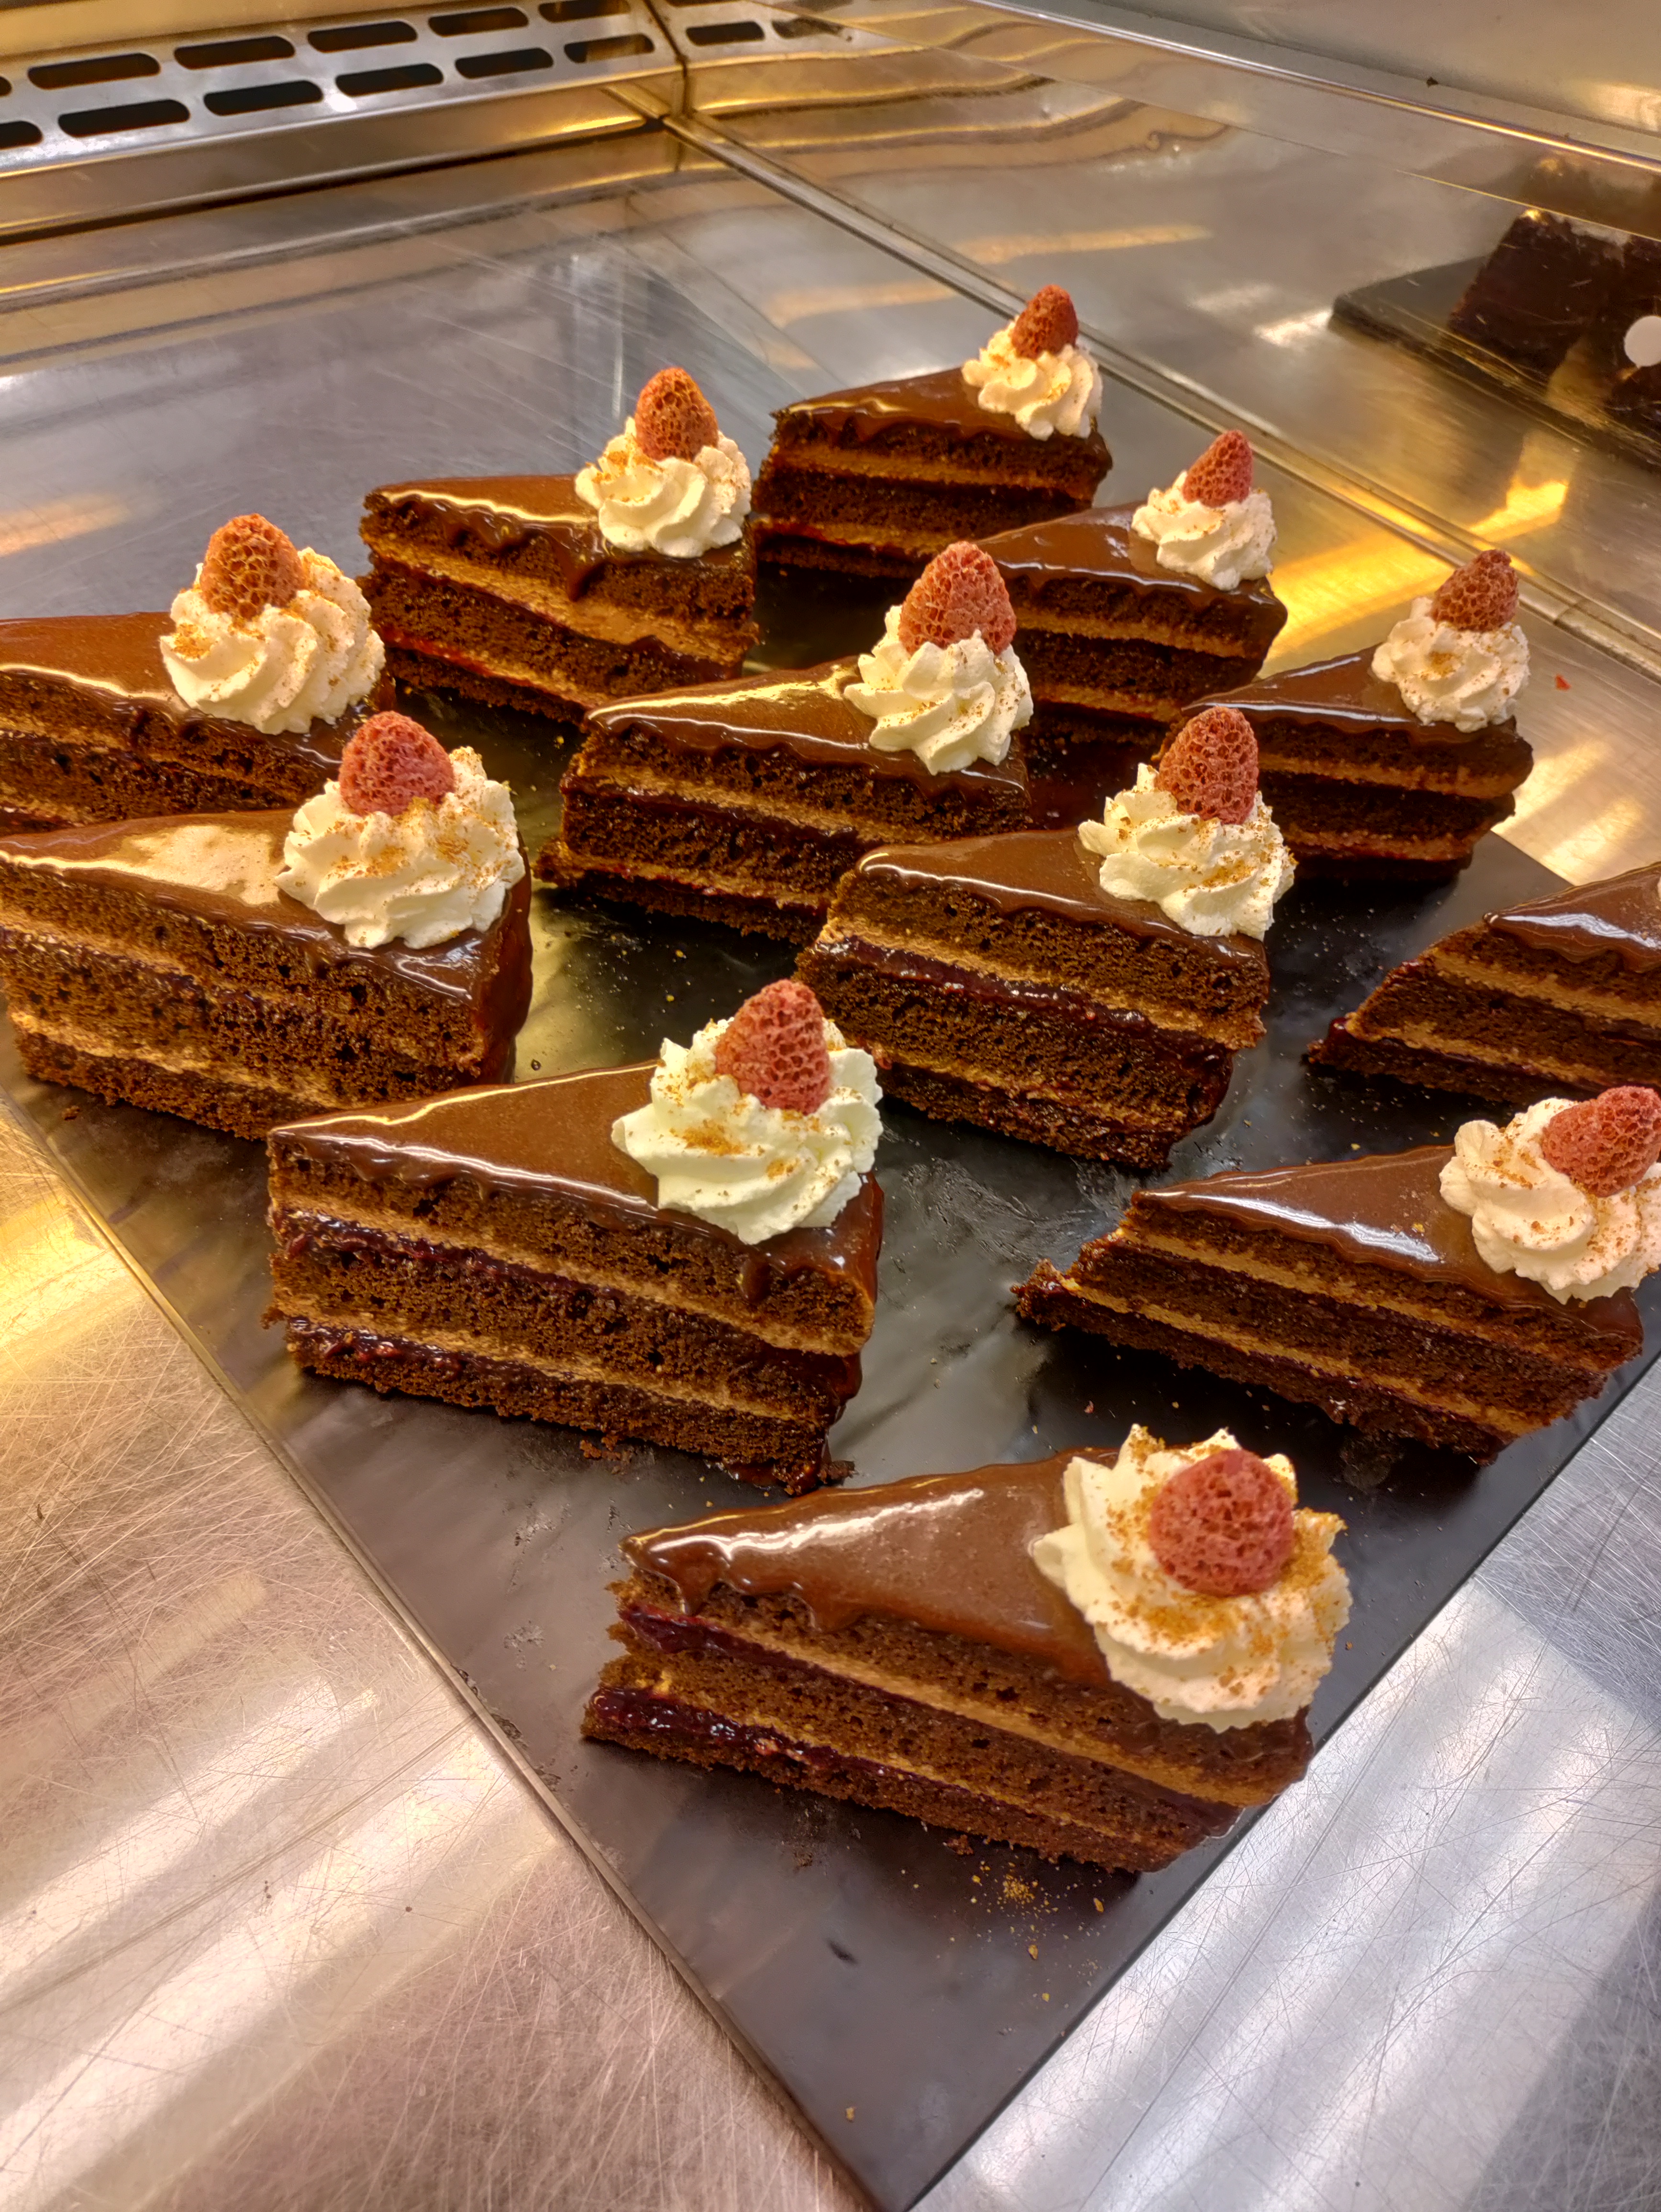 slices of layered chocolate cakes topped with a shiny chocolate glaze and garnished with whipped cream and freeze dried raspberries